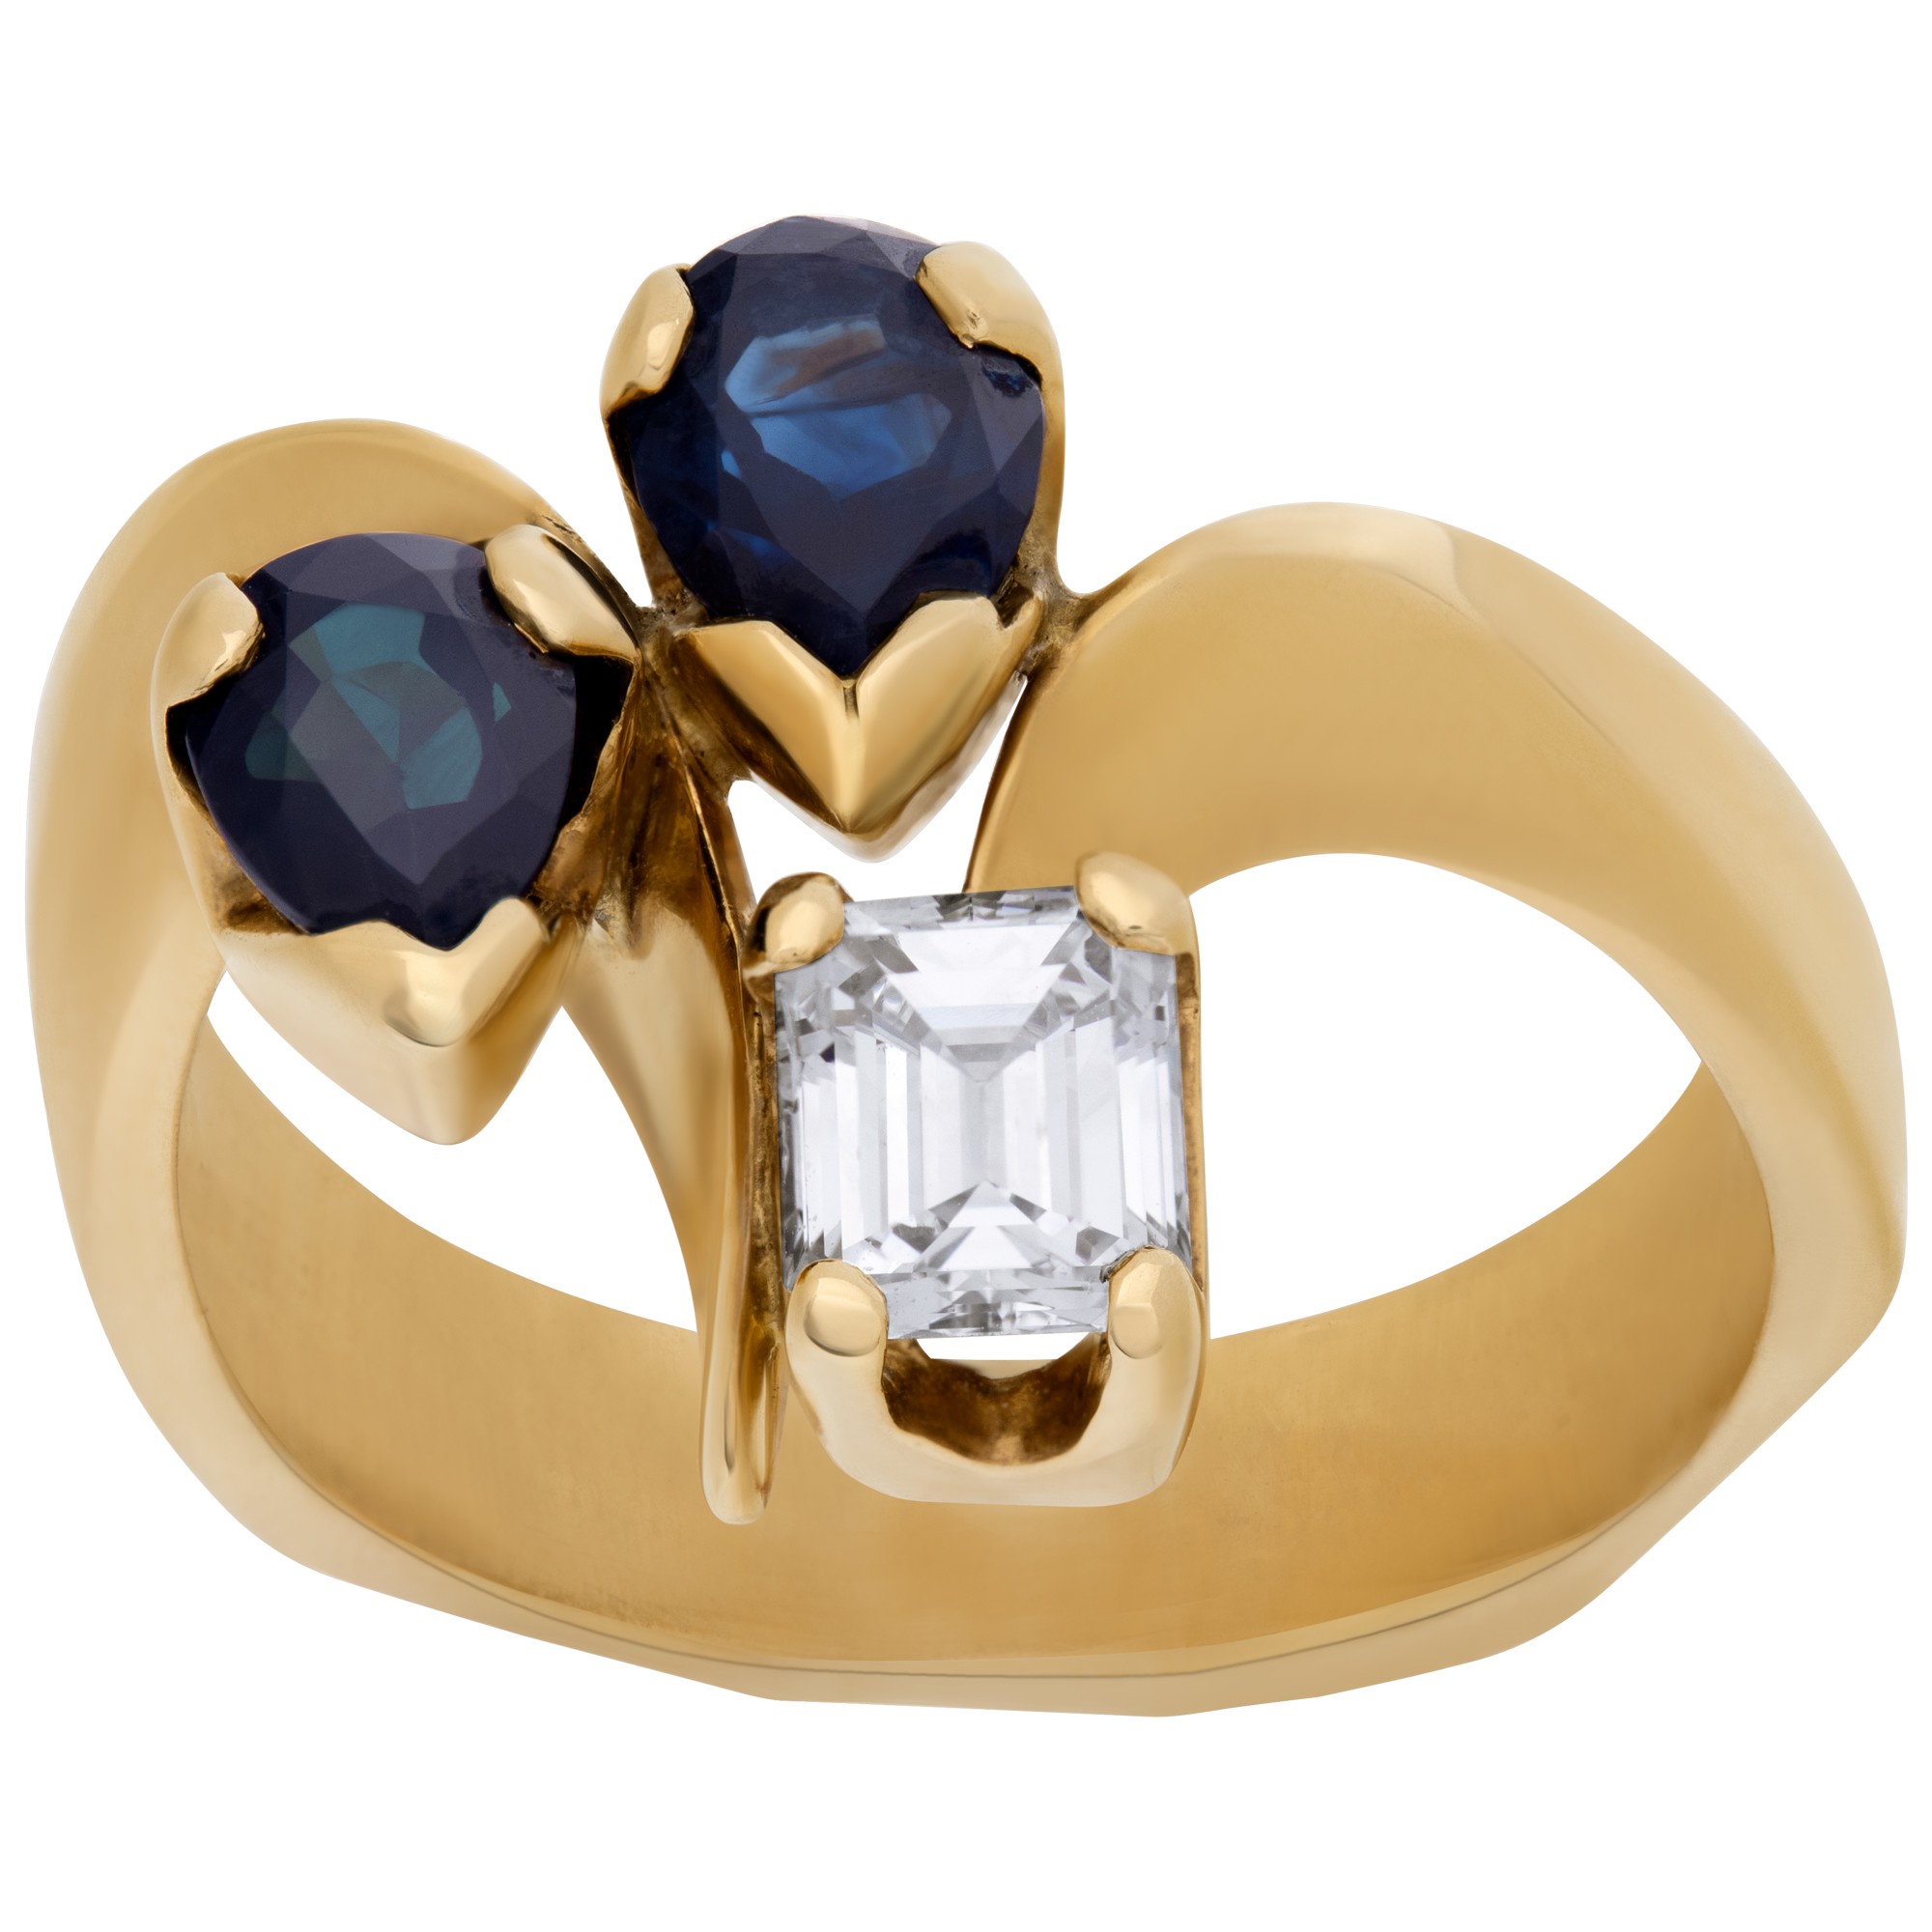 Pretty diamond & sapphire ring in 14k yellow gold. Size 7.25. image 1